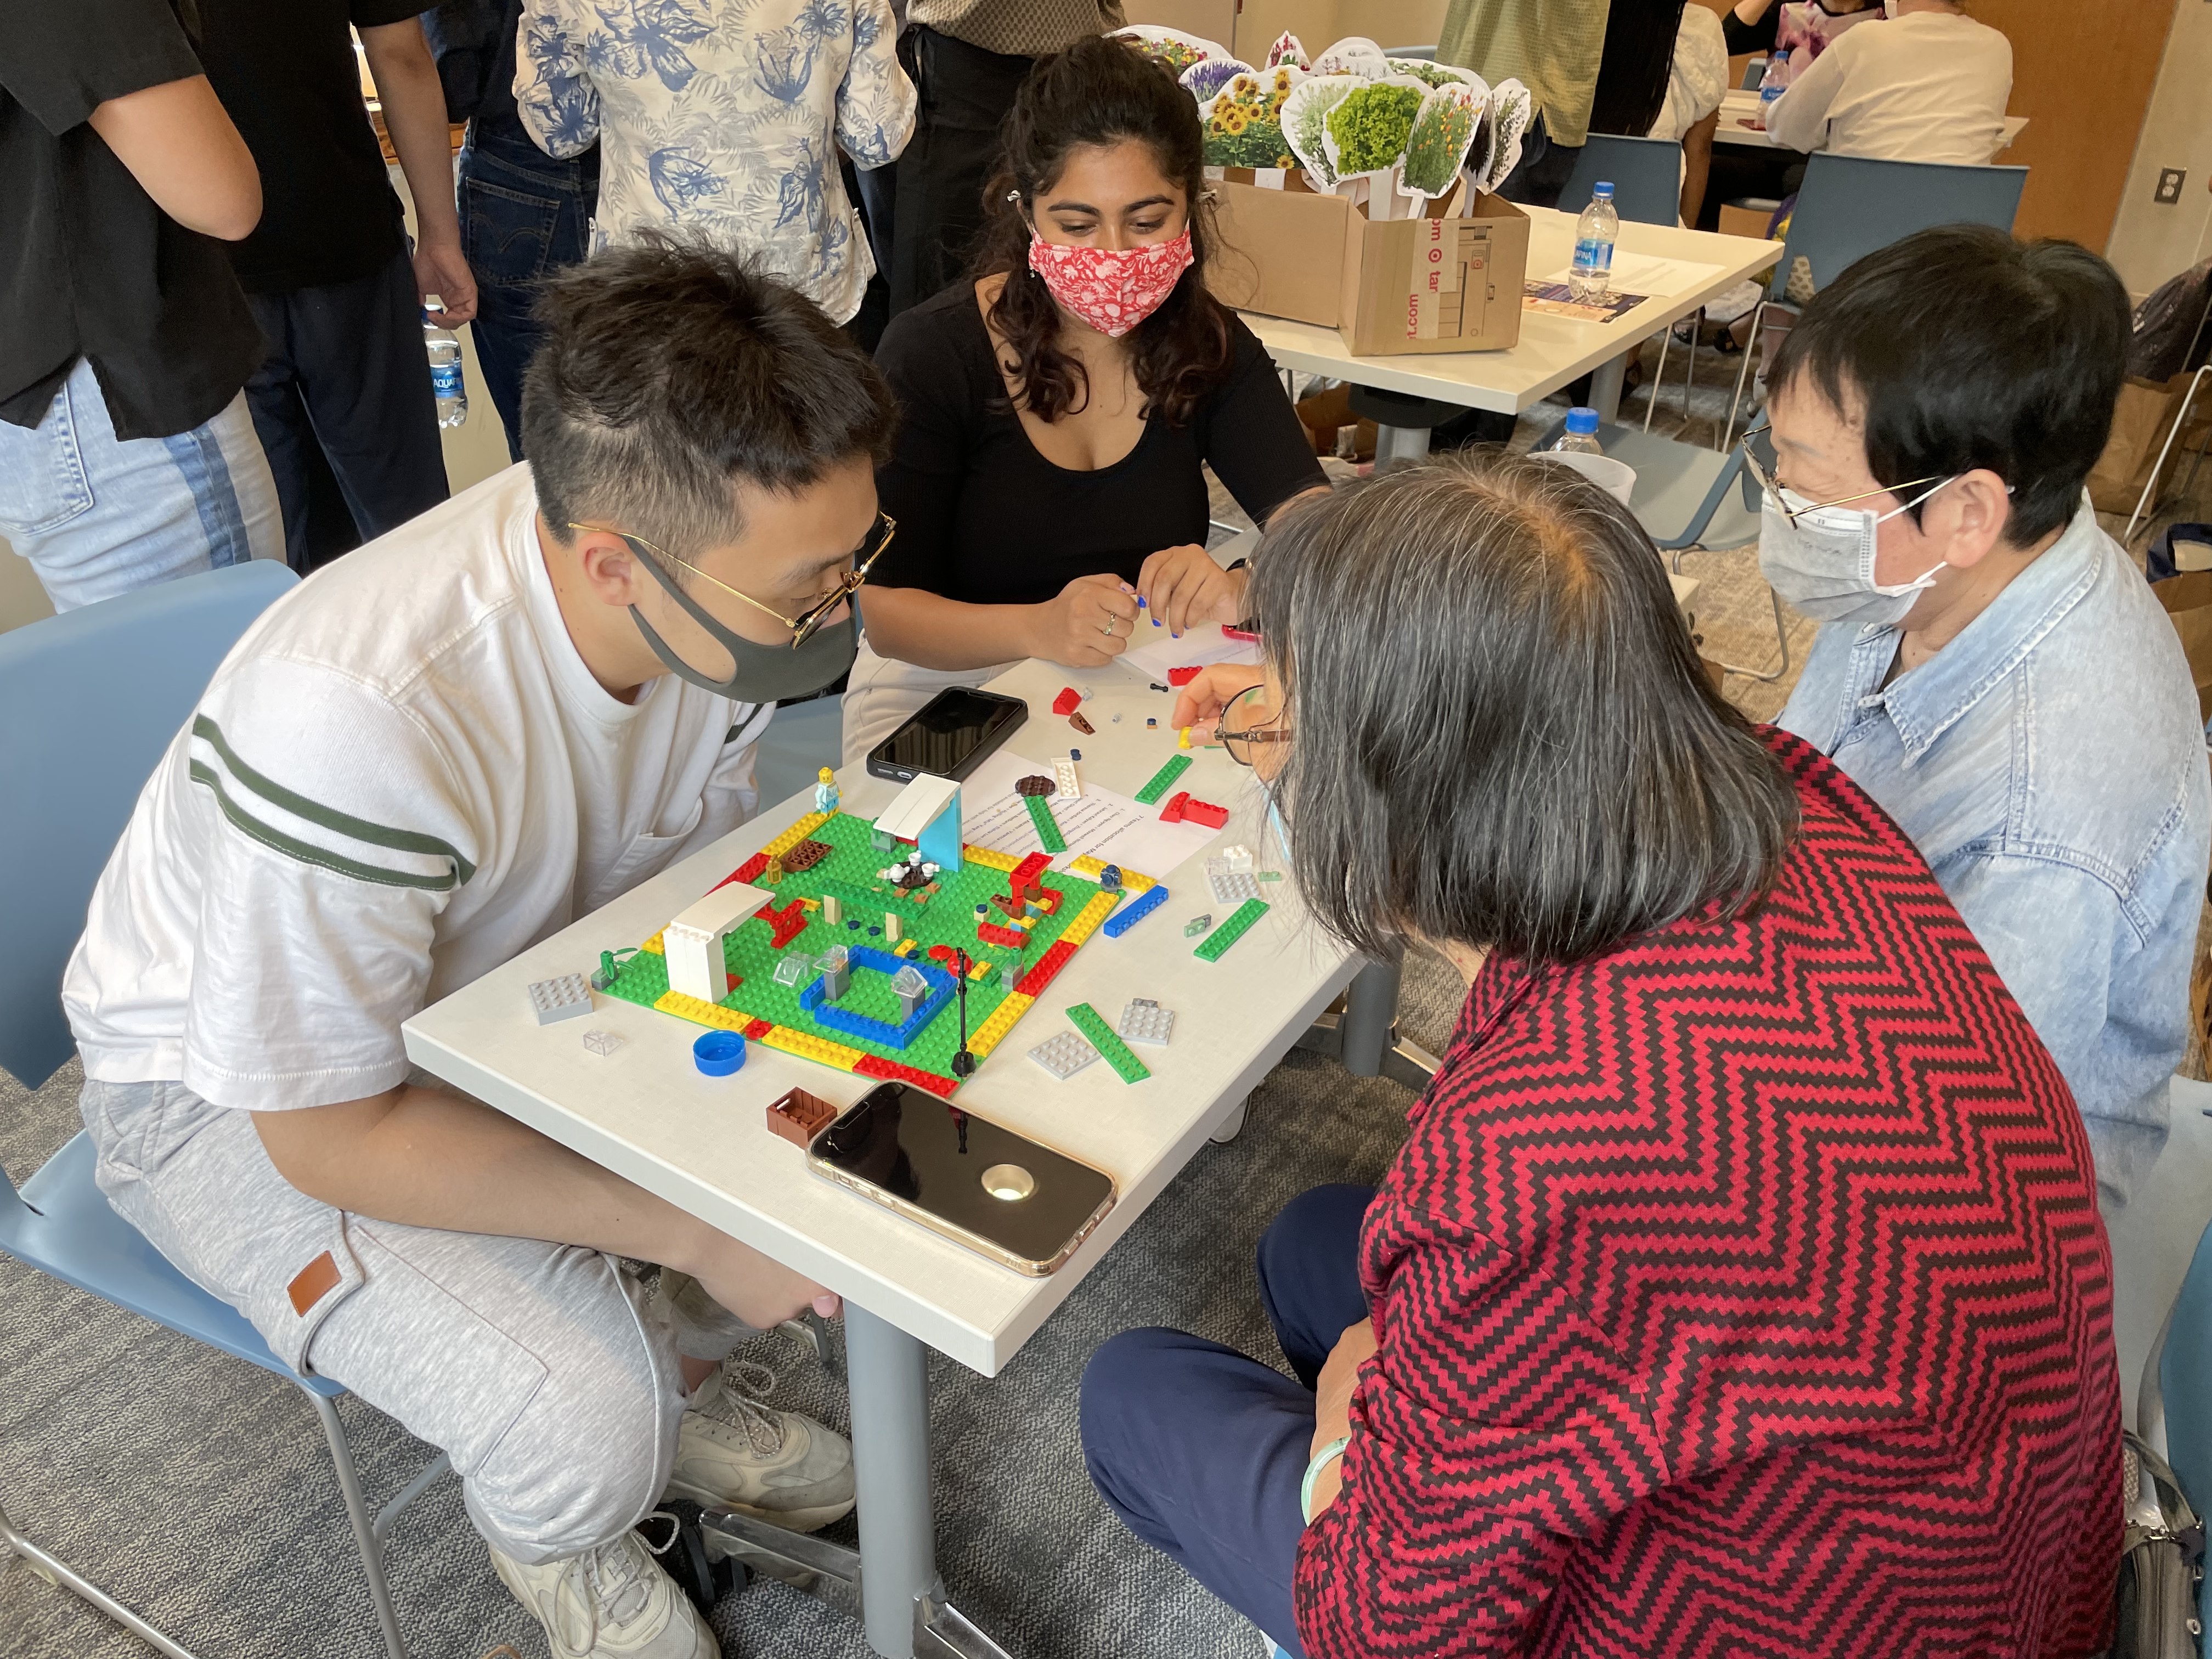 Students collaborate with older adults in co-design workshop